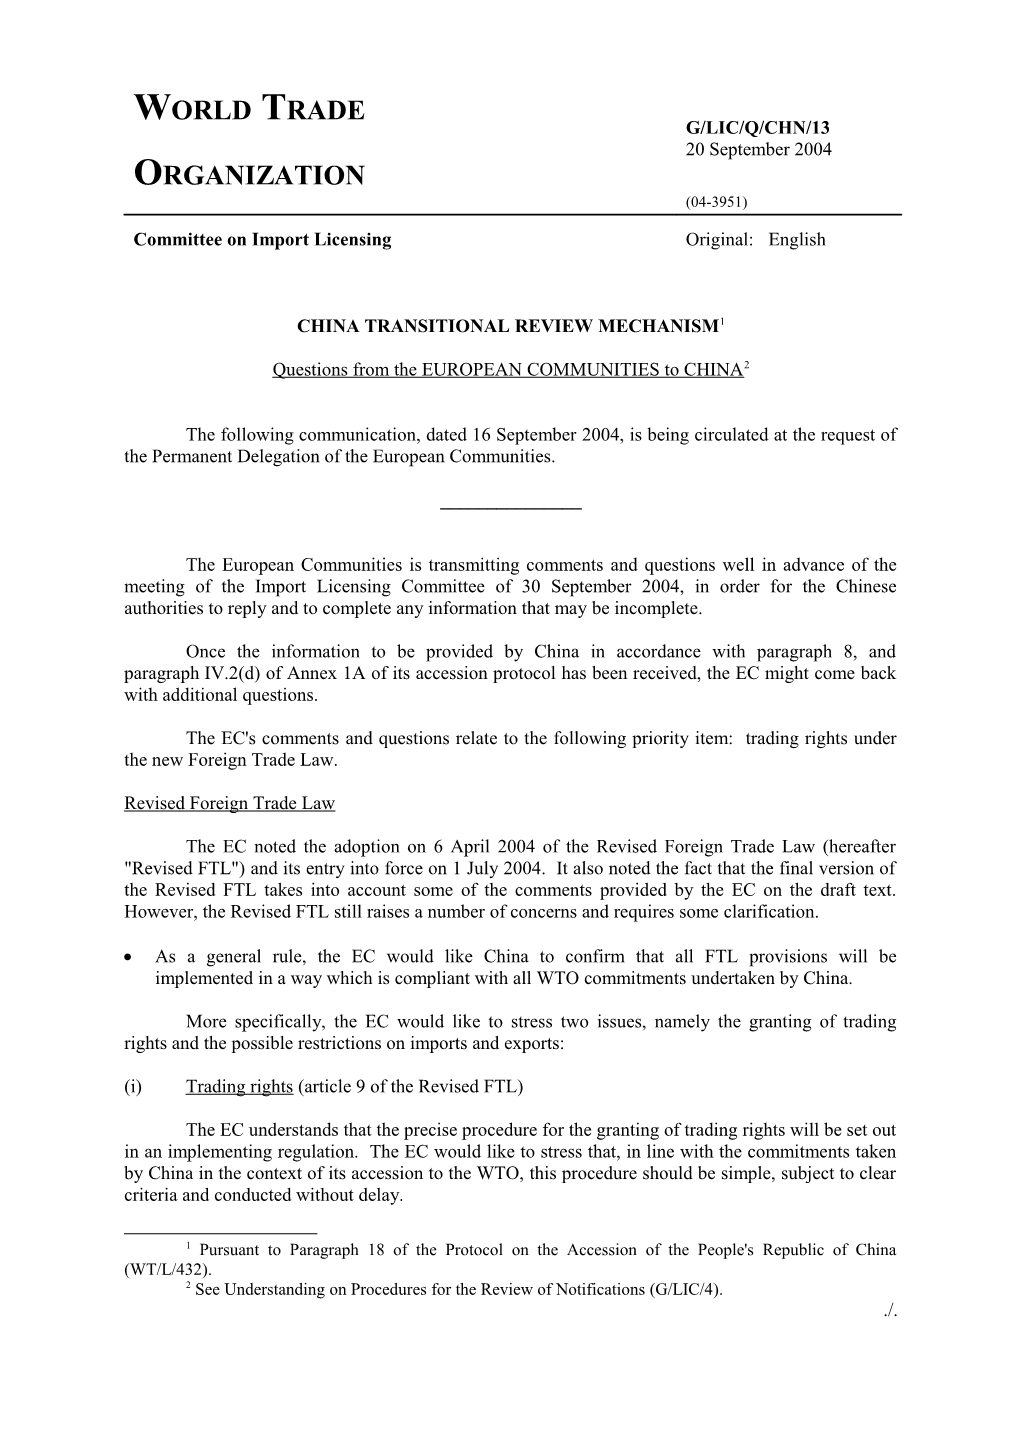 China Transitional Review Mechanism 1